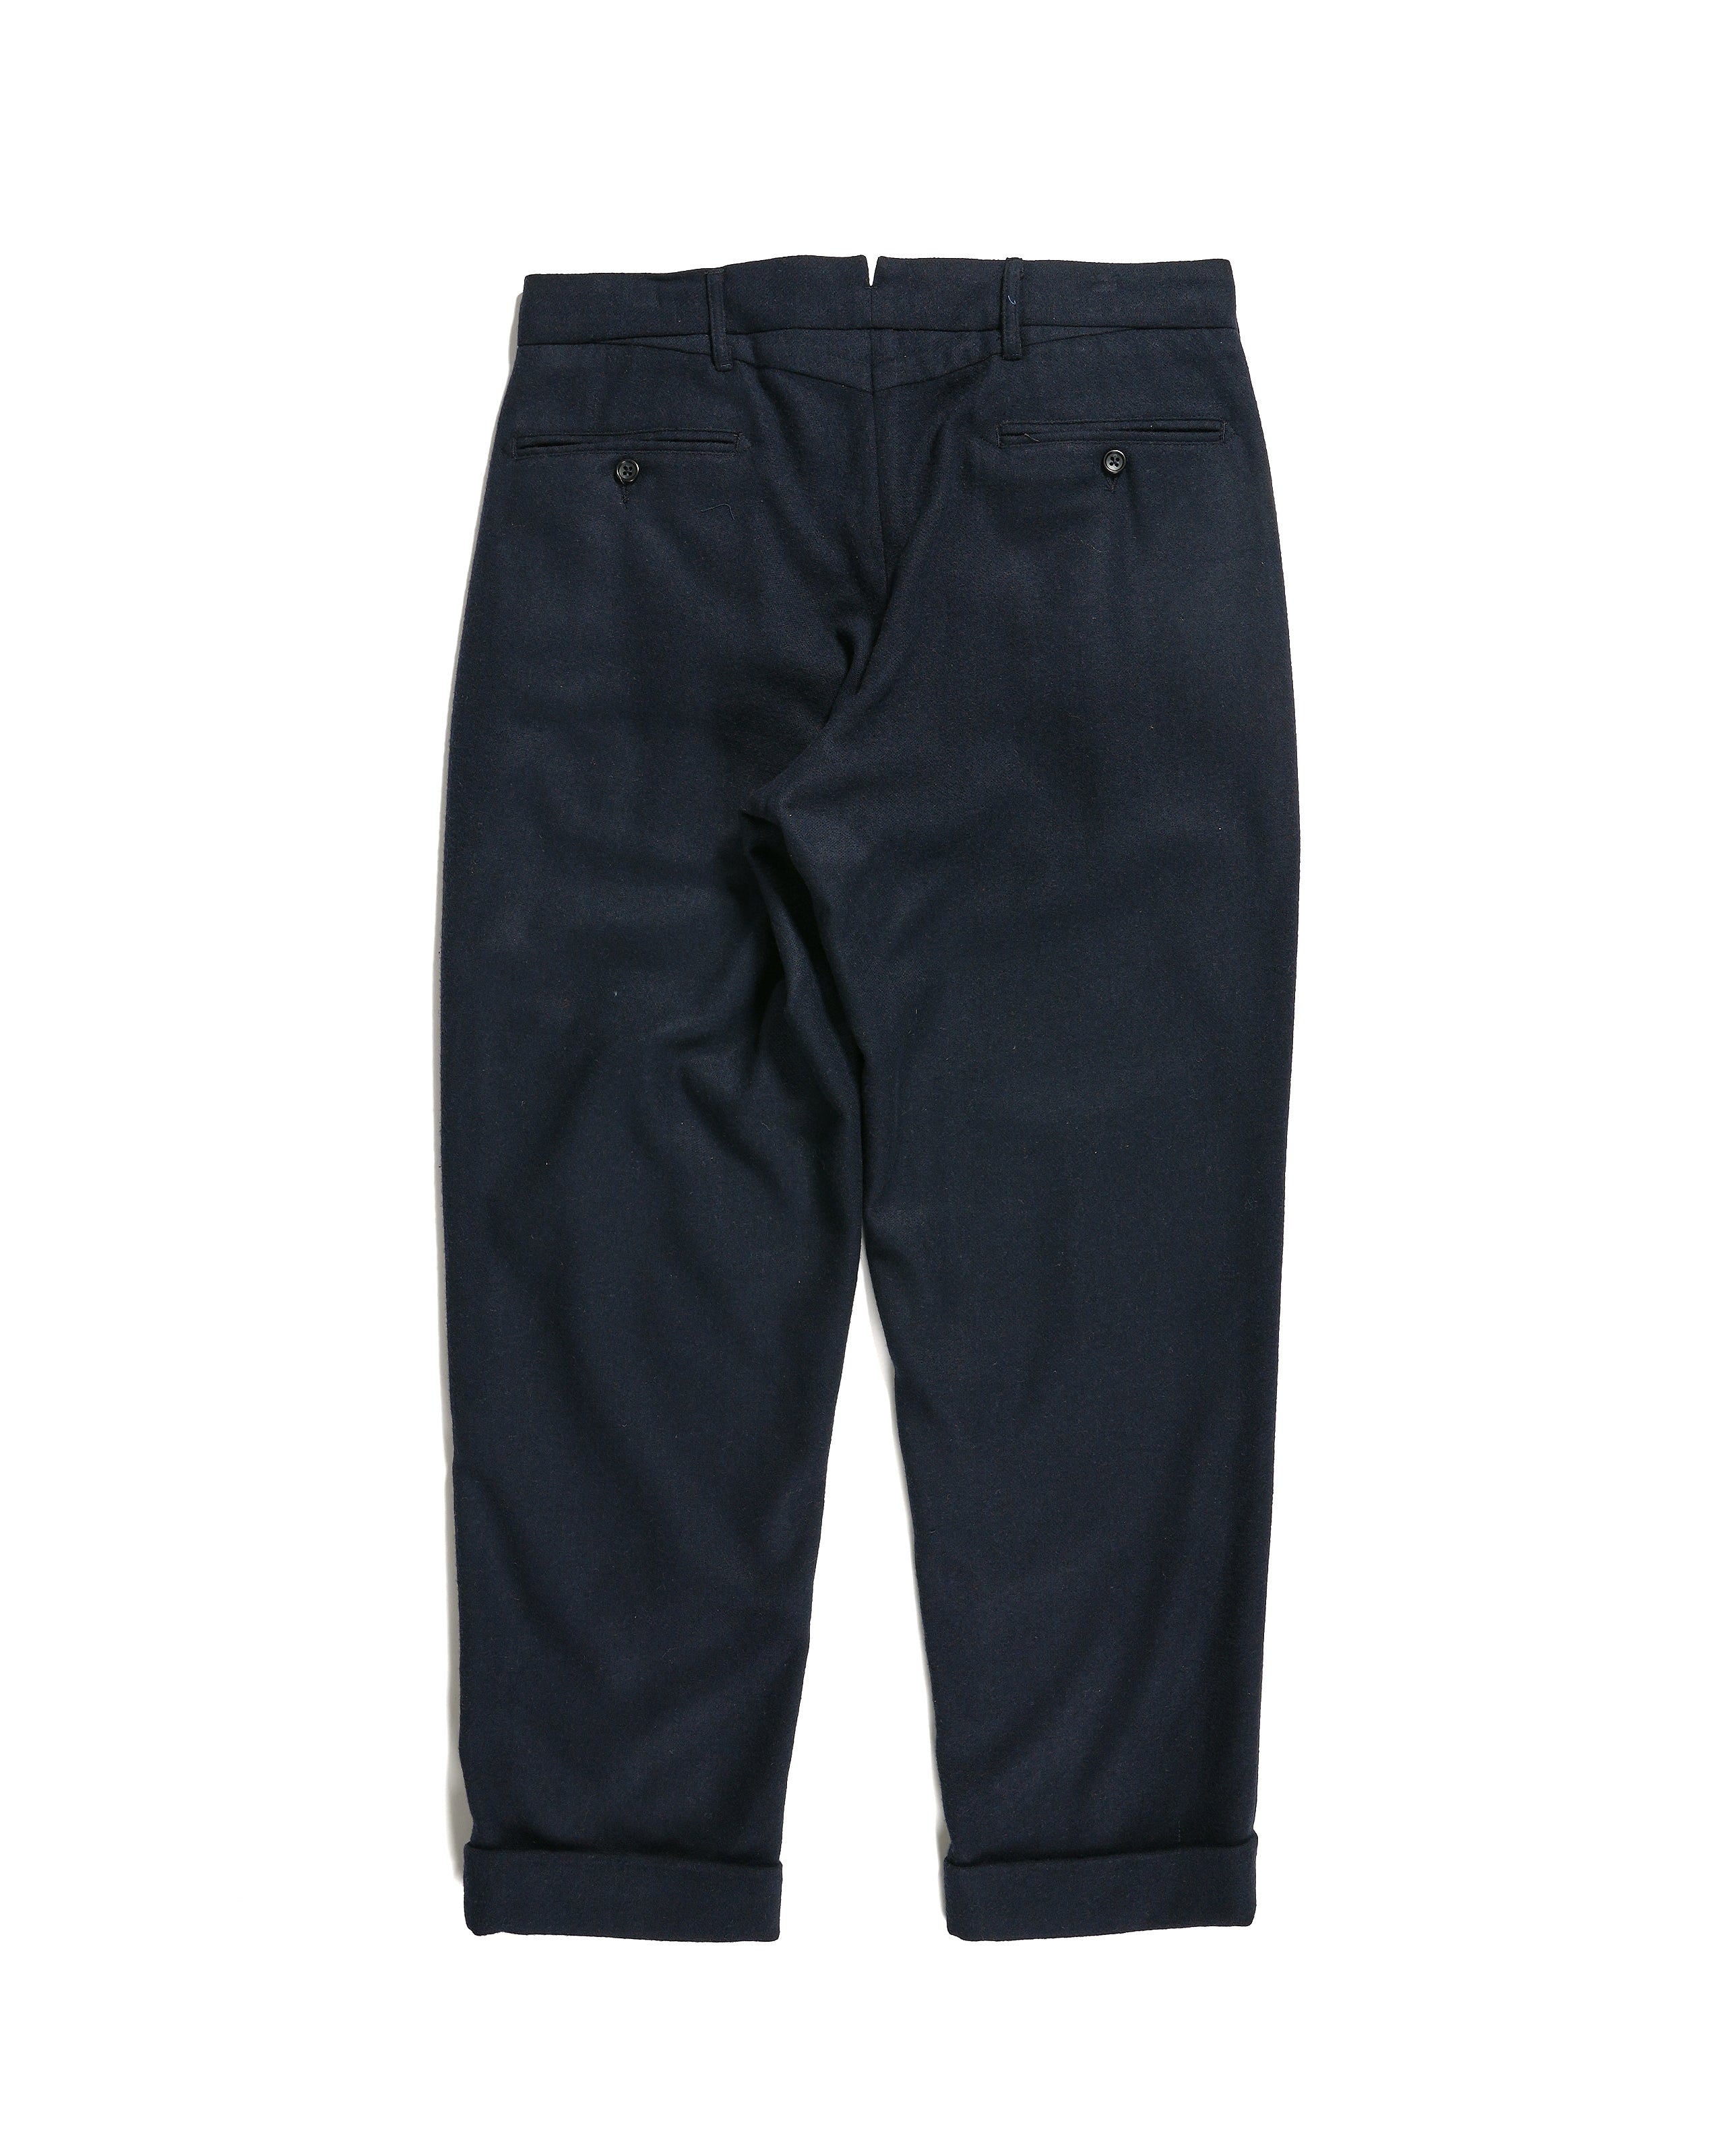 Andover Pant - Navy Solid Poly Wool Flannel